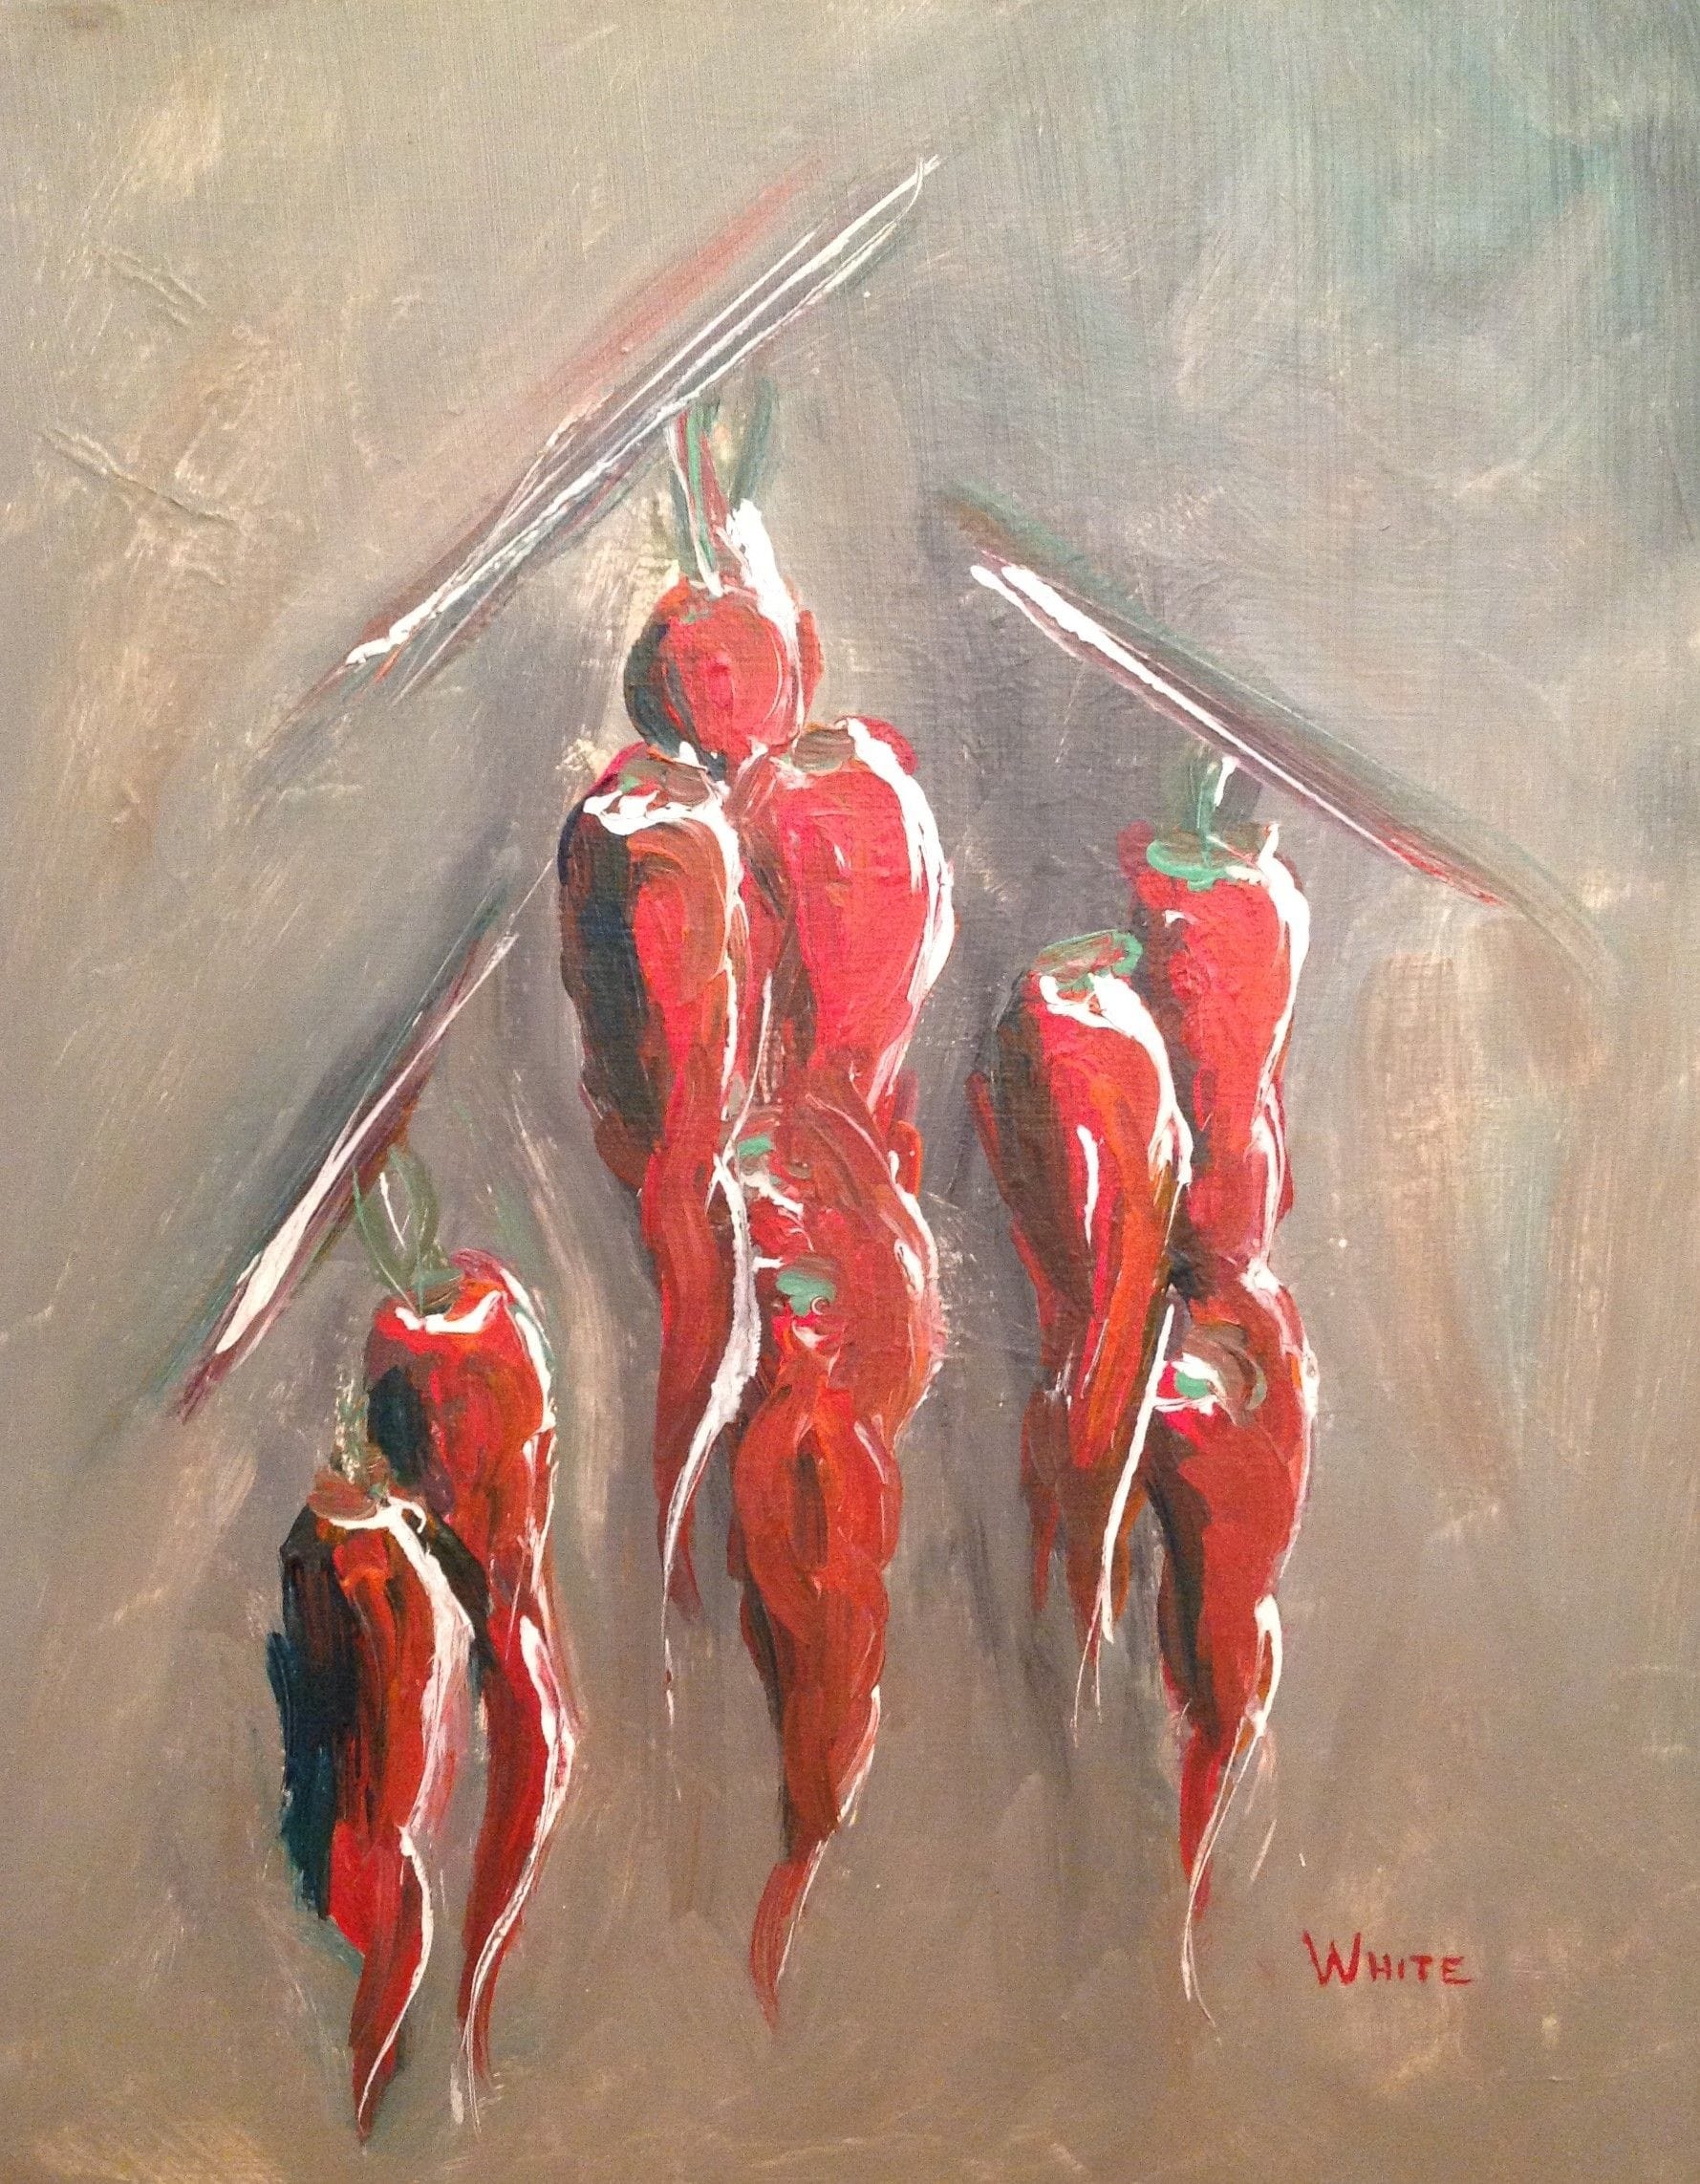 Hot Peppers, 1988
Acrylic on Canvas
16"W x 20"H, Walli White, artist